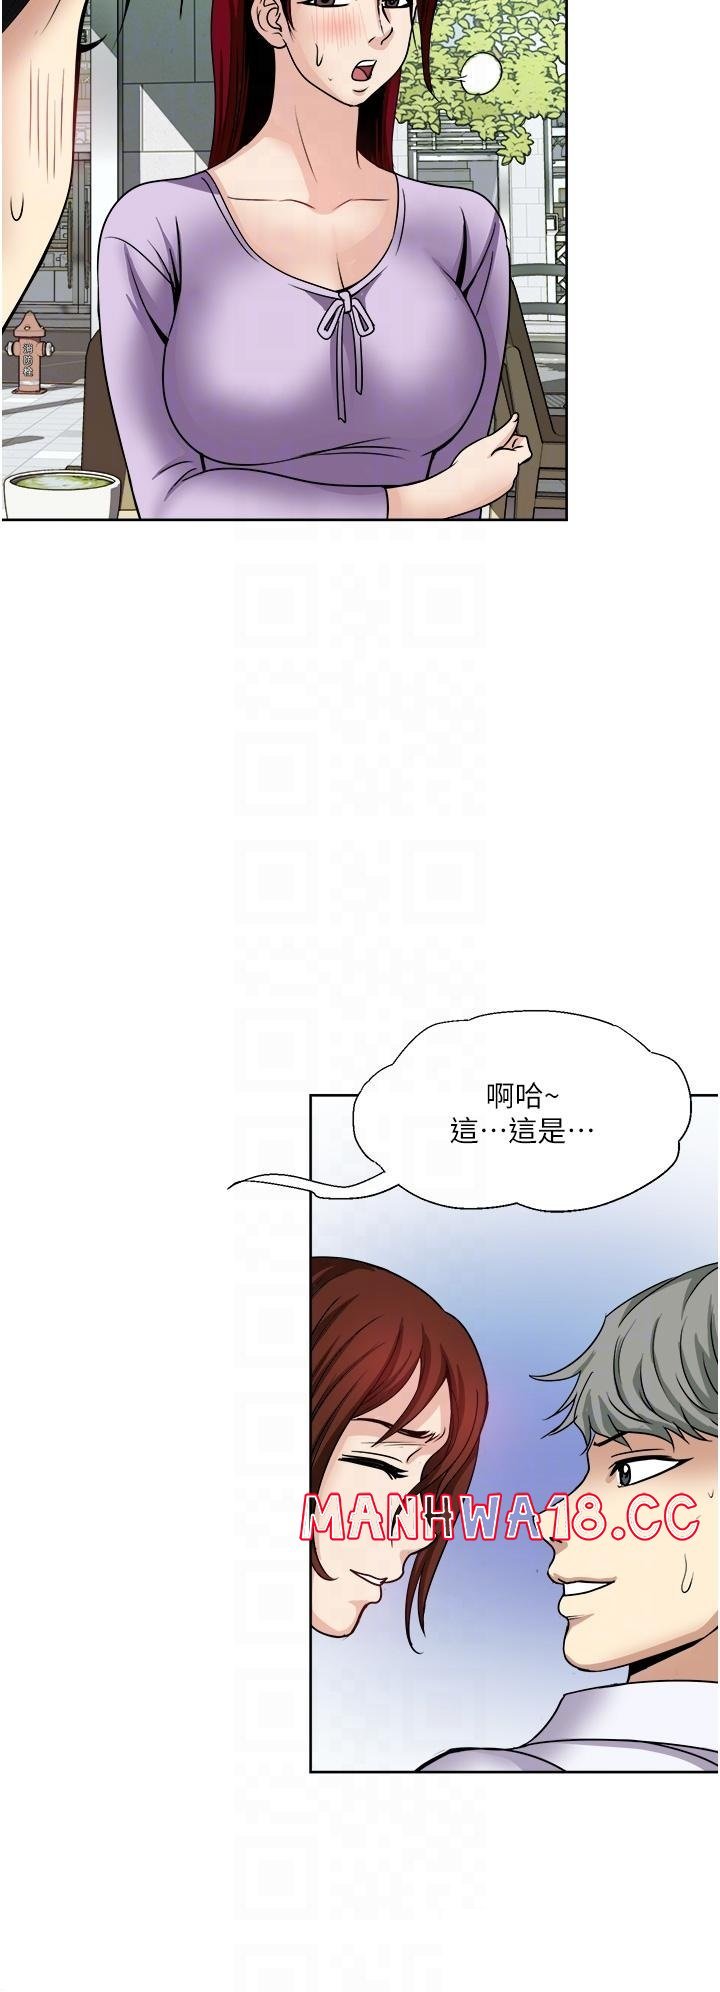 just-once-raw-chap-31-7